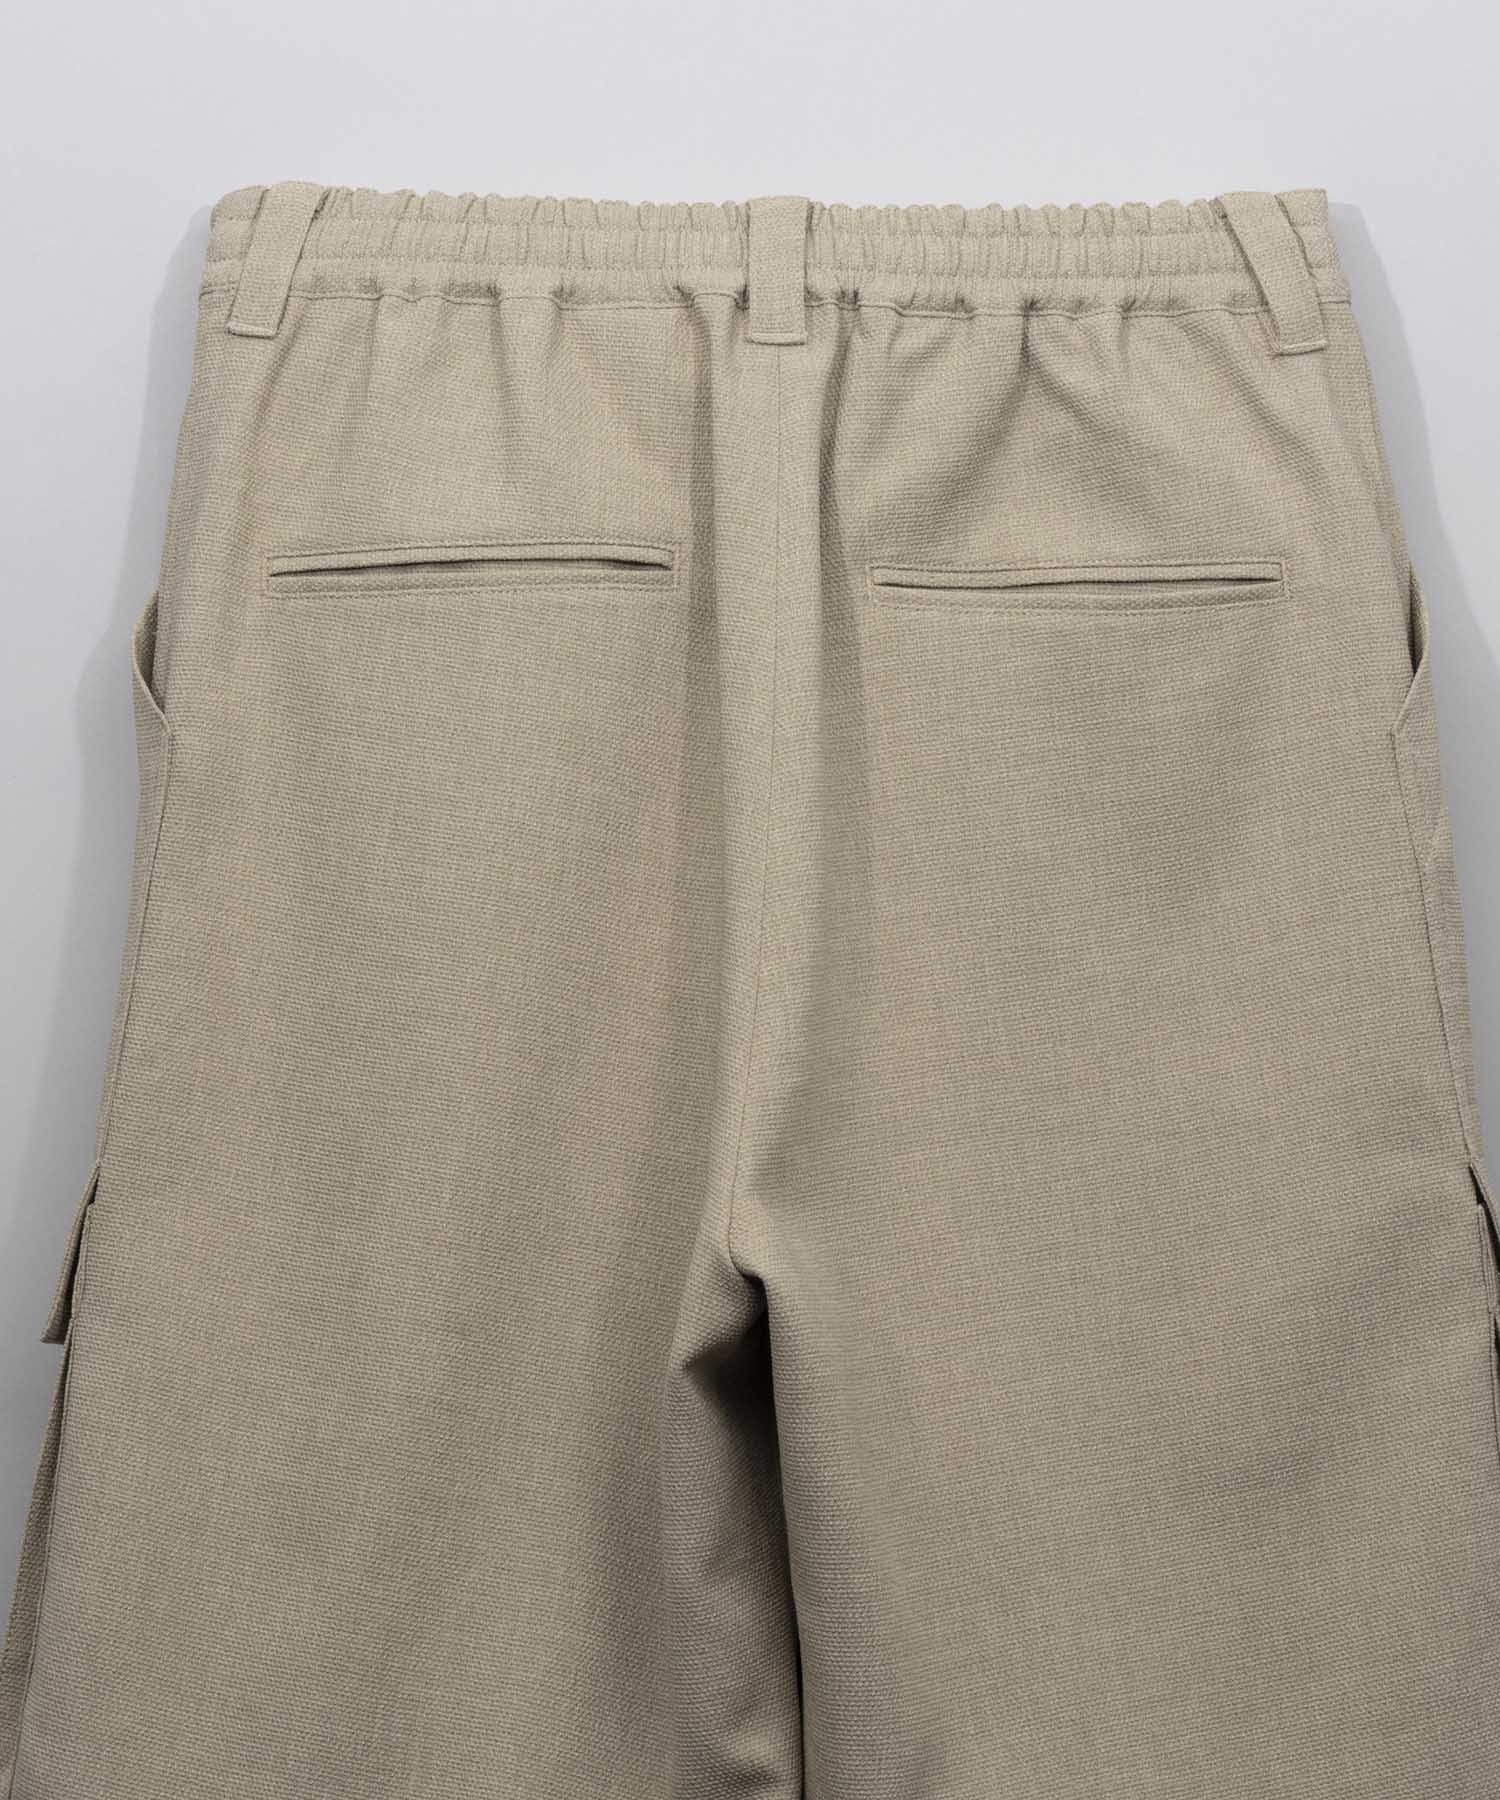 2WAY Hunting Wide Cargo Pants